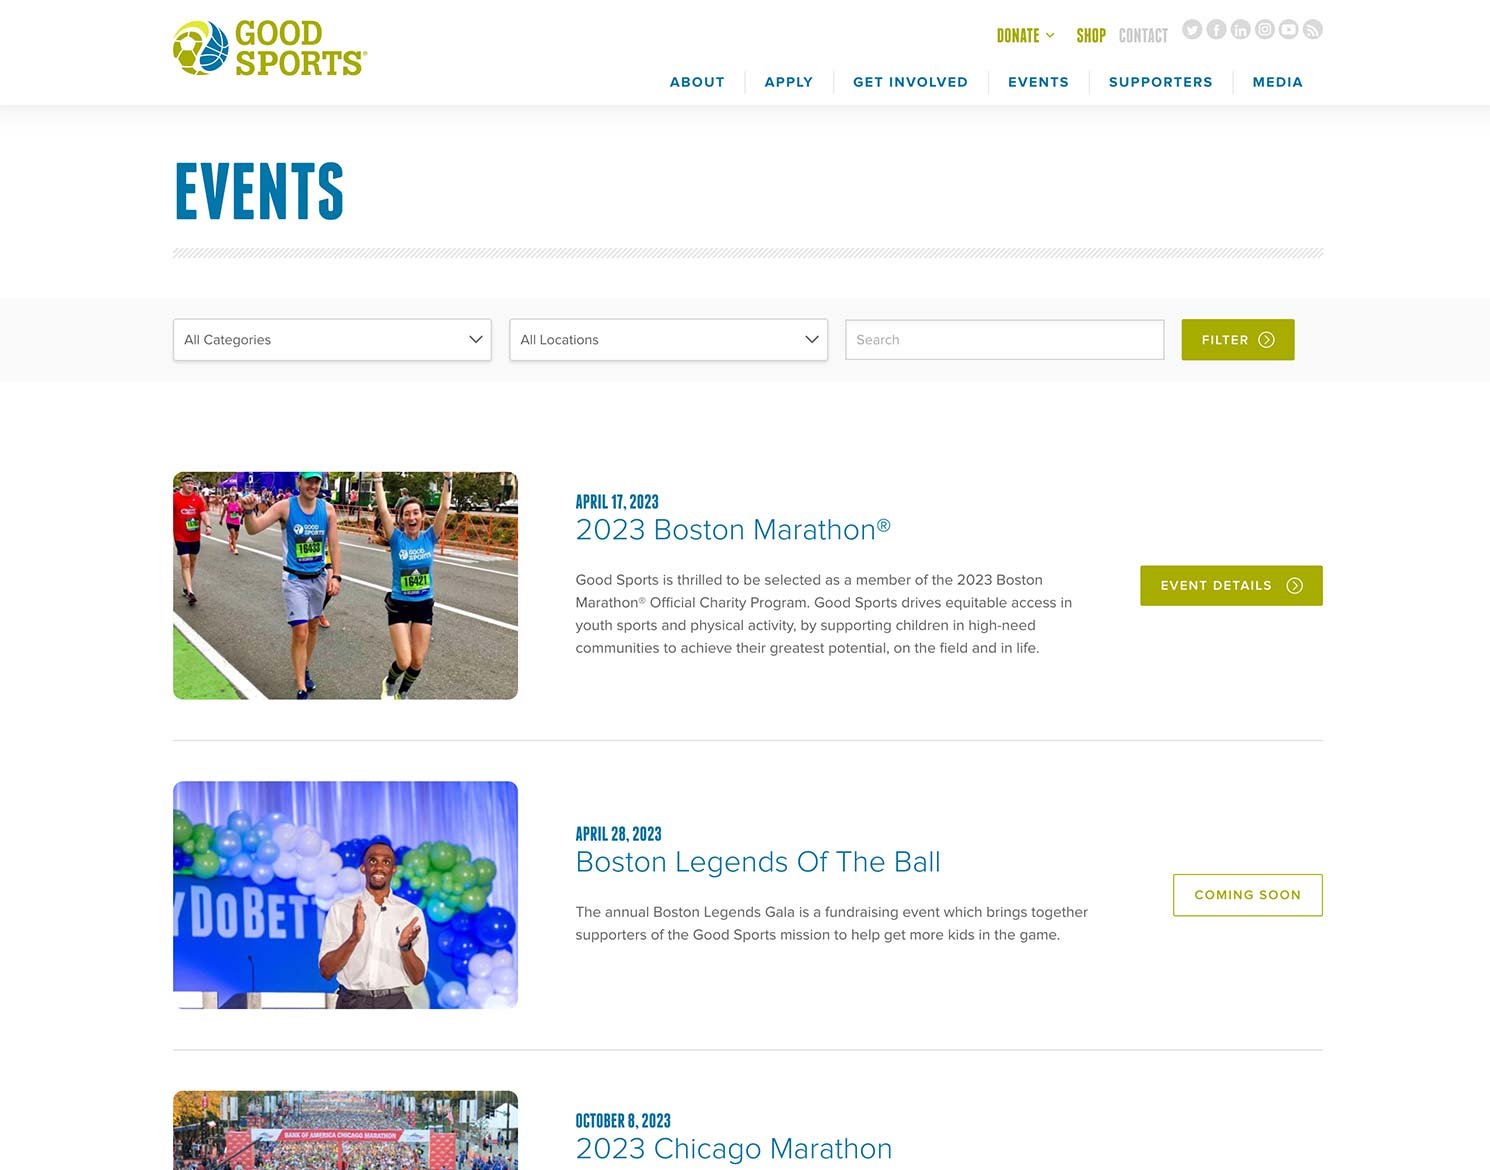 Good Sports website events page